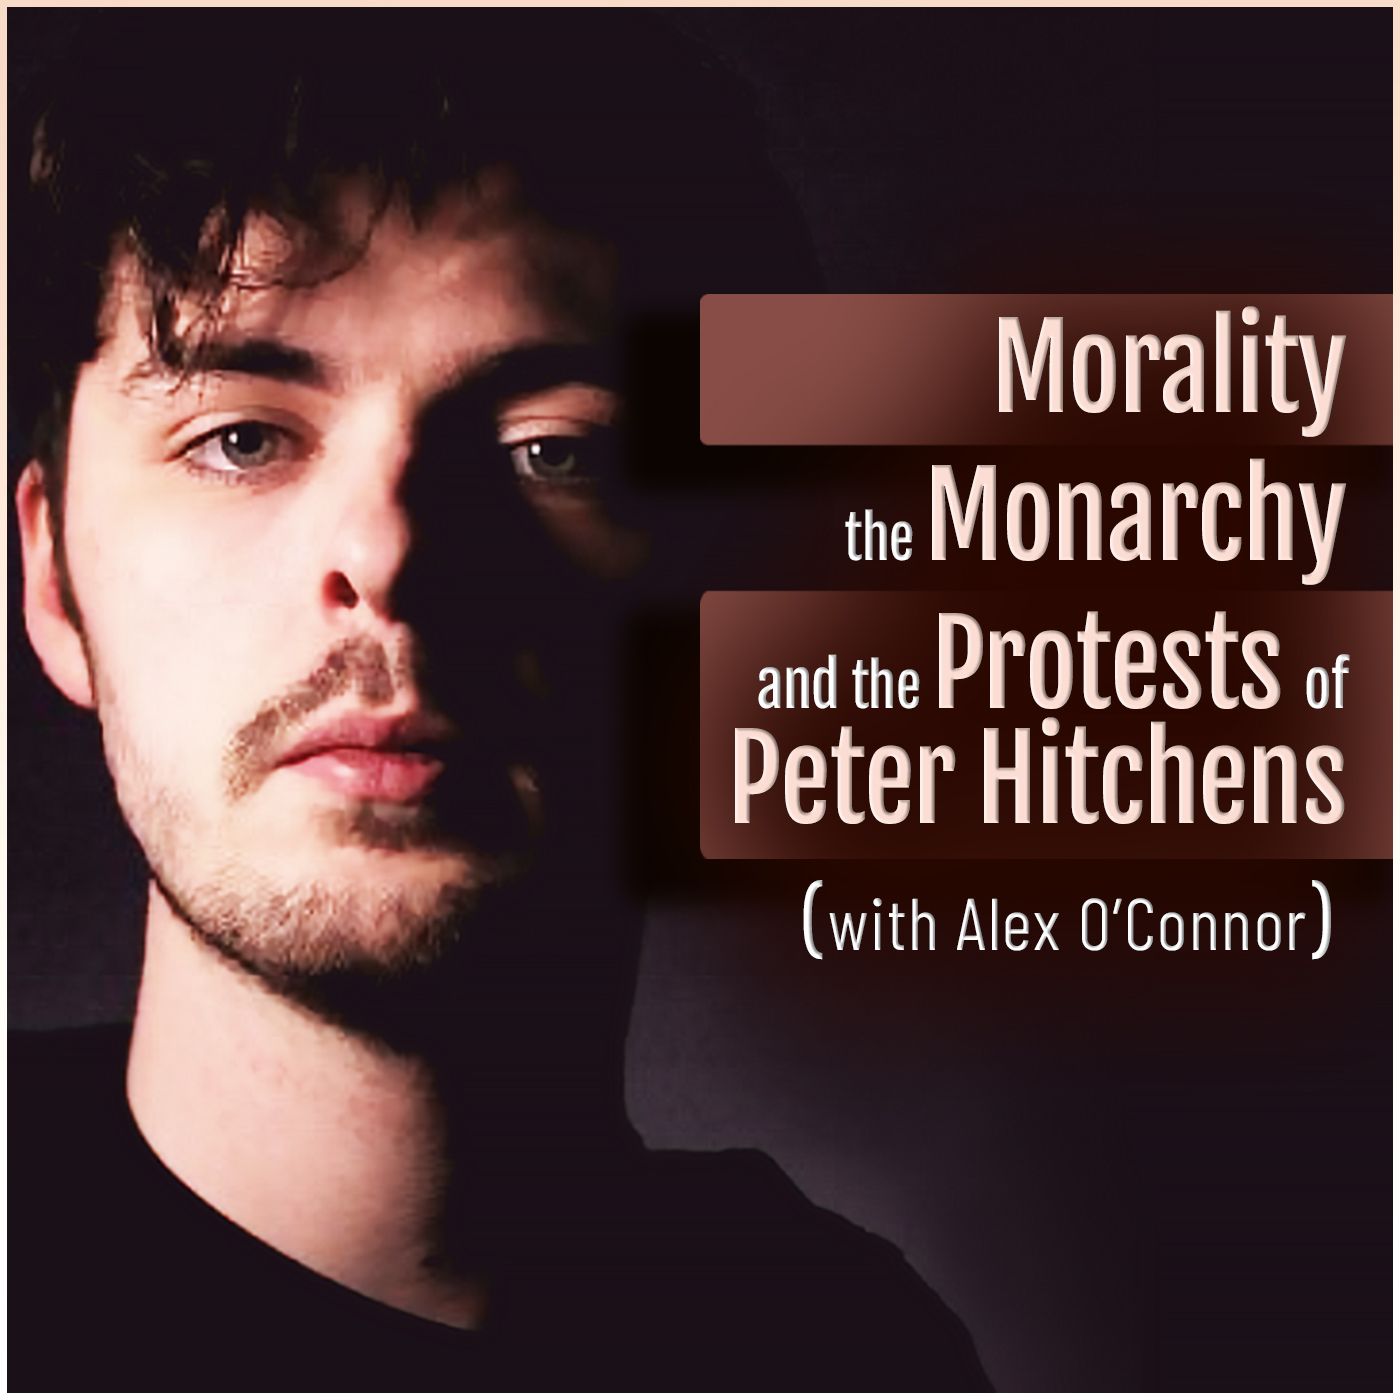 Morality, the Monarchy, and the Protests of Peter Hitchens (with Alex O’Connor)